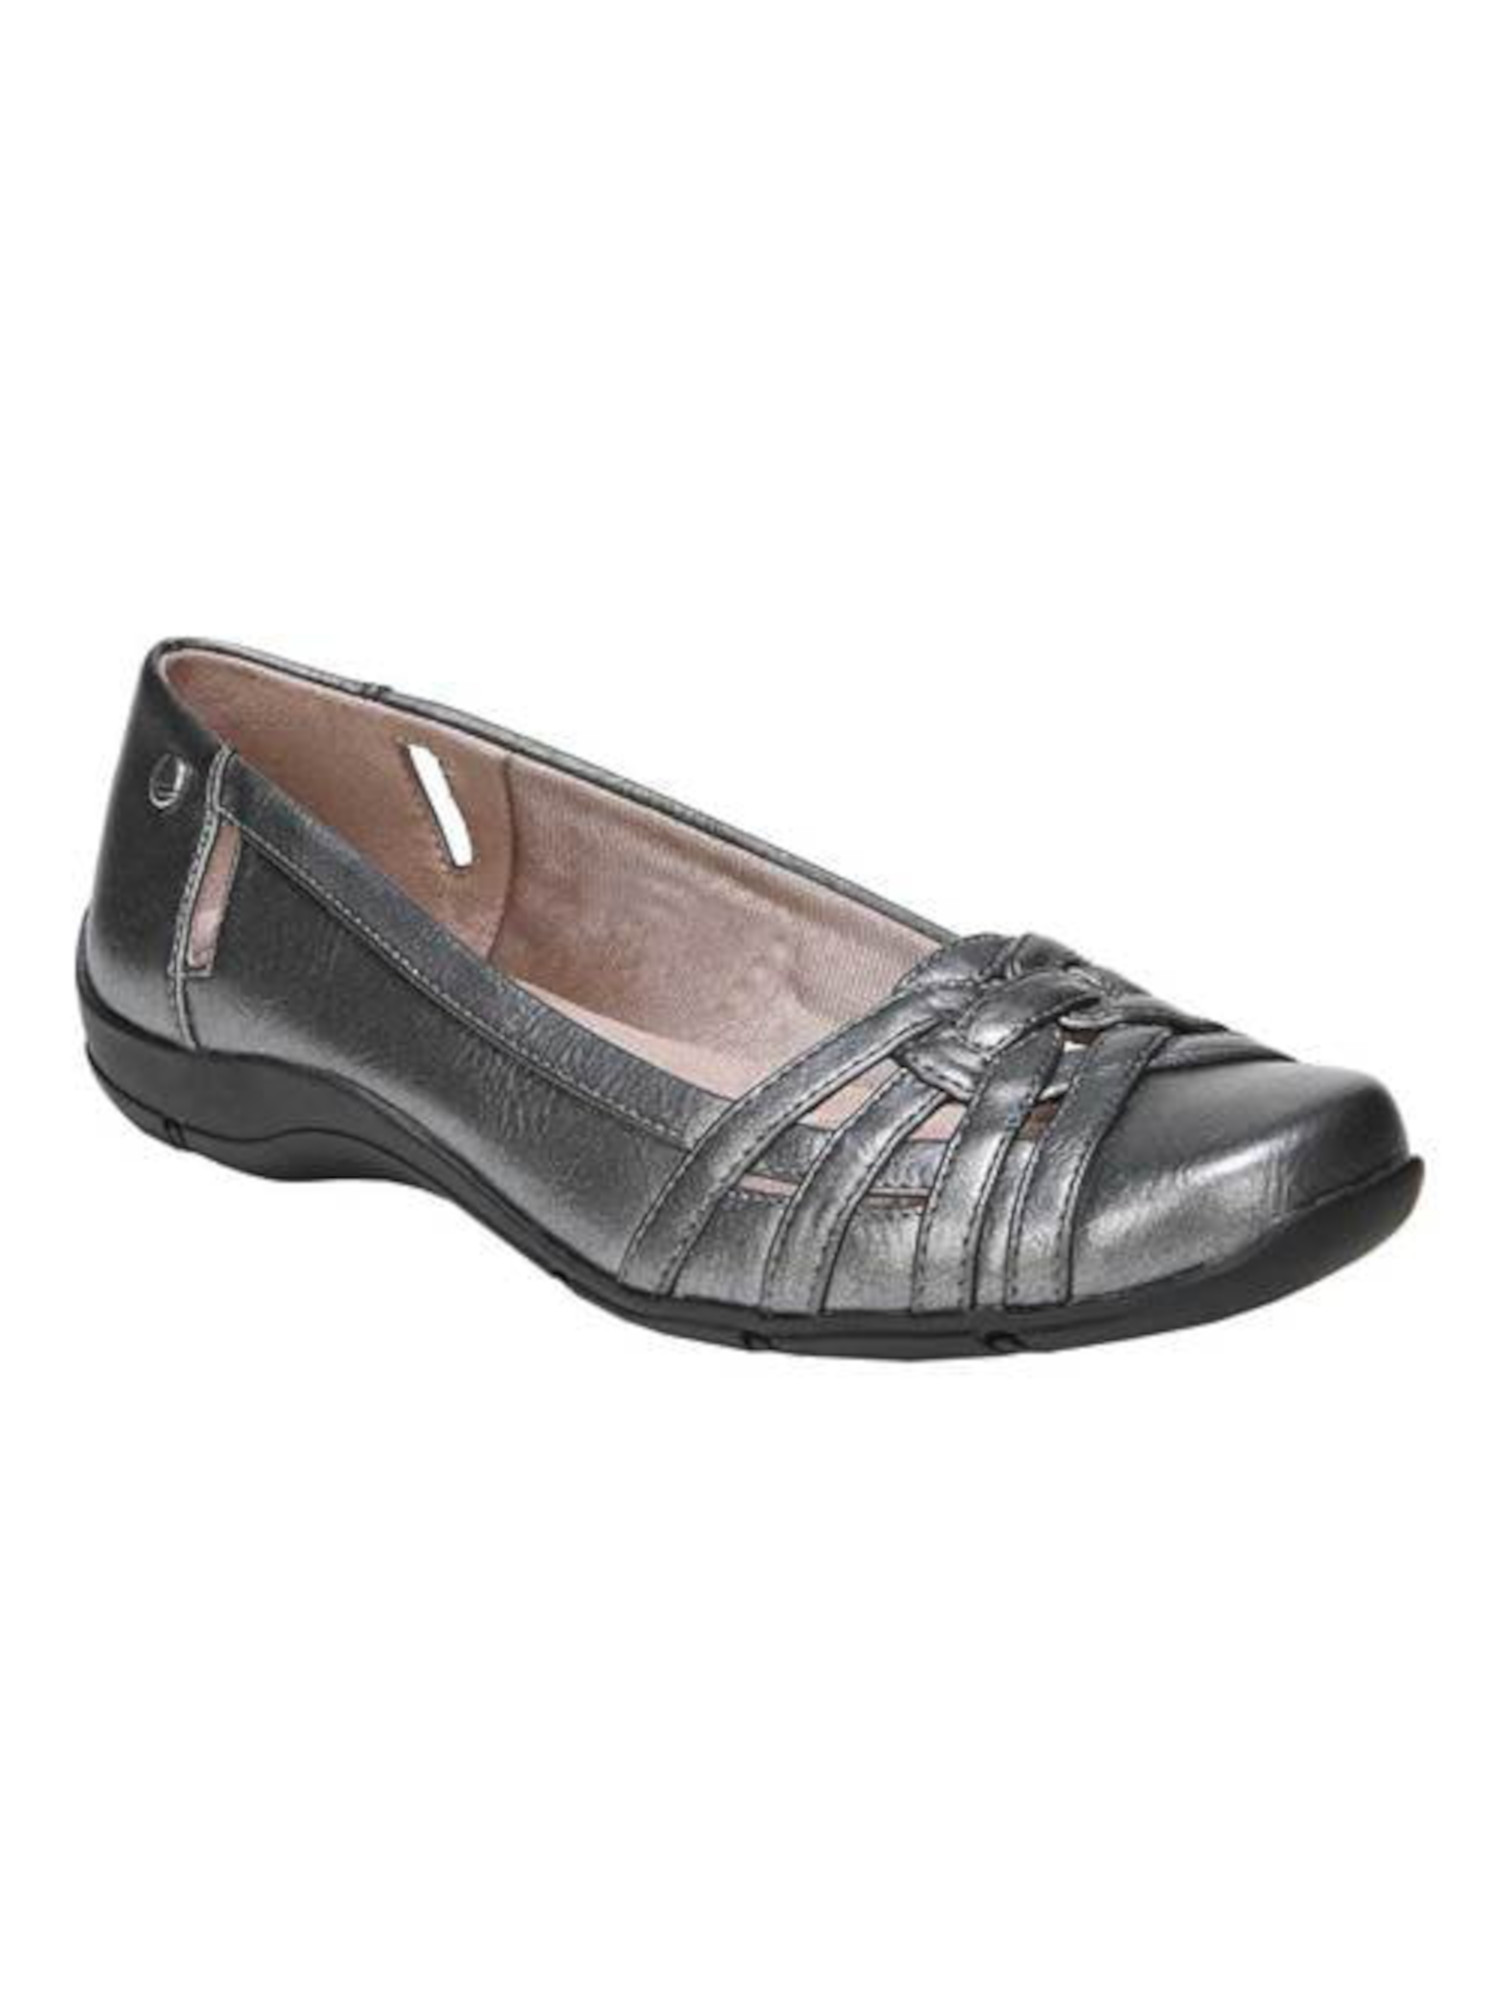 LifeStride LIFE STRIDE Womens Silver Studded Open Detailing At Heel Cushioned Woven Diverse Round Toe Wedge Slip On Flats 8.5 N